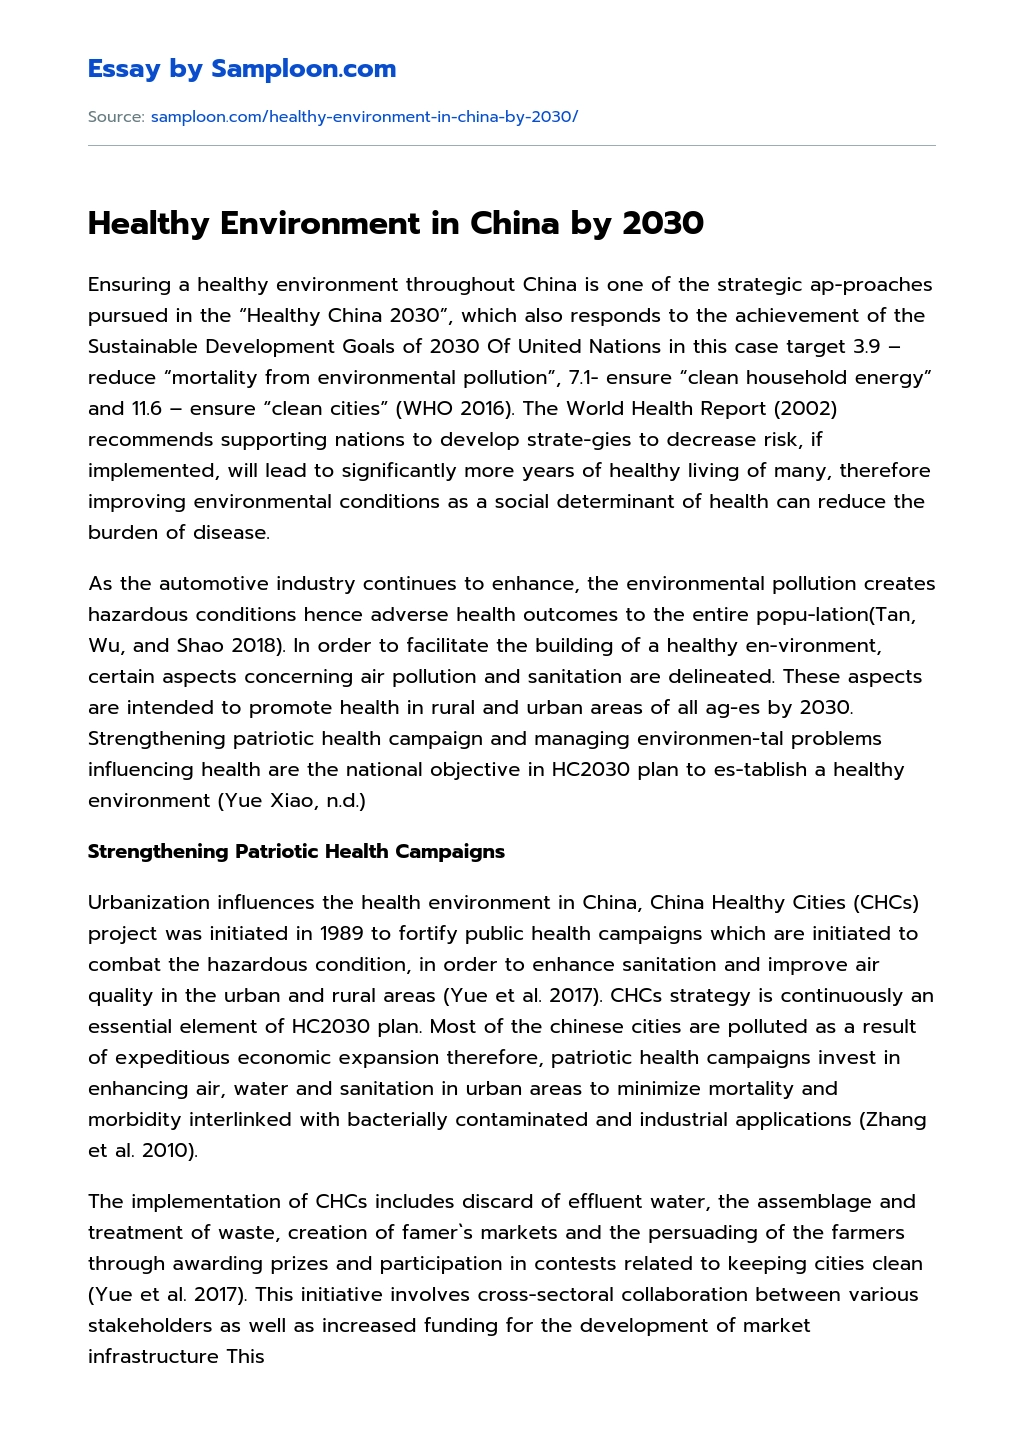 Healthy Environment in China by 2030 essay